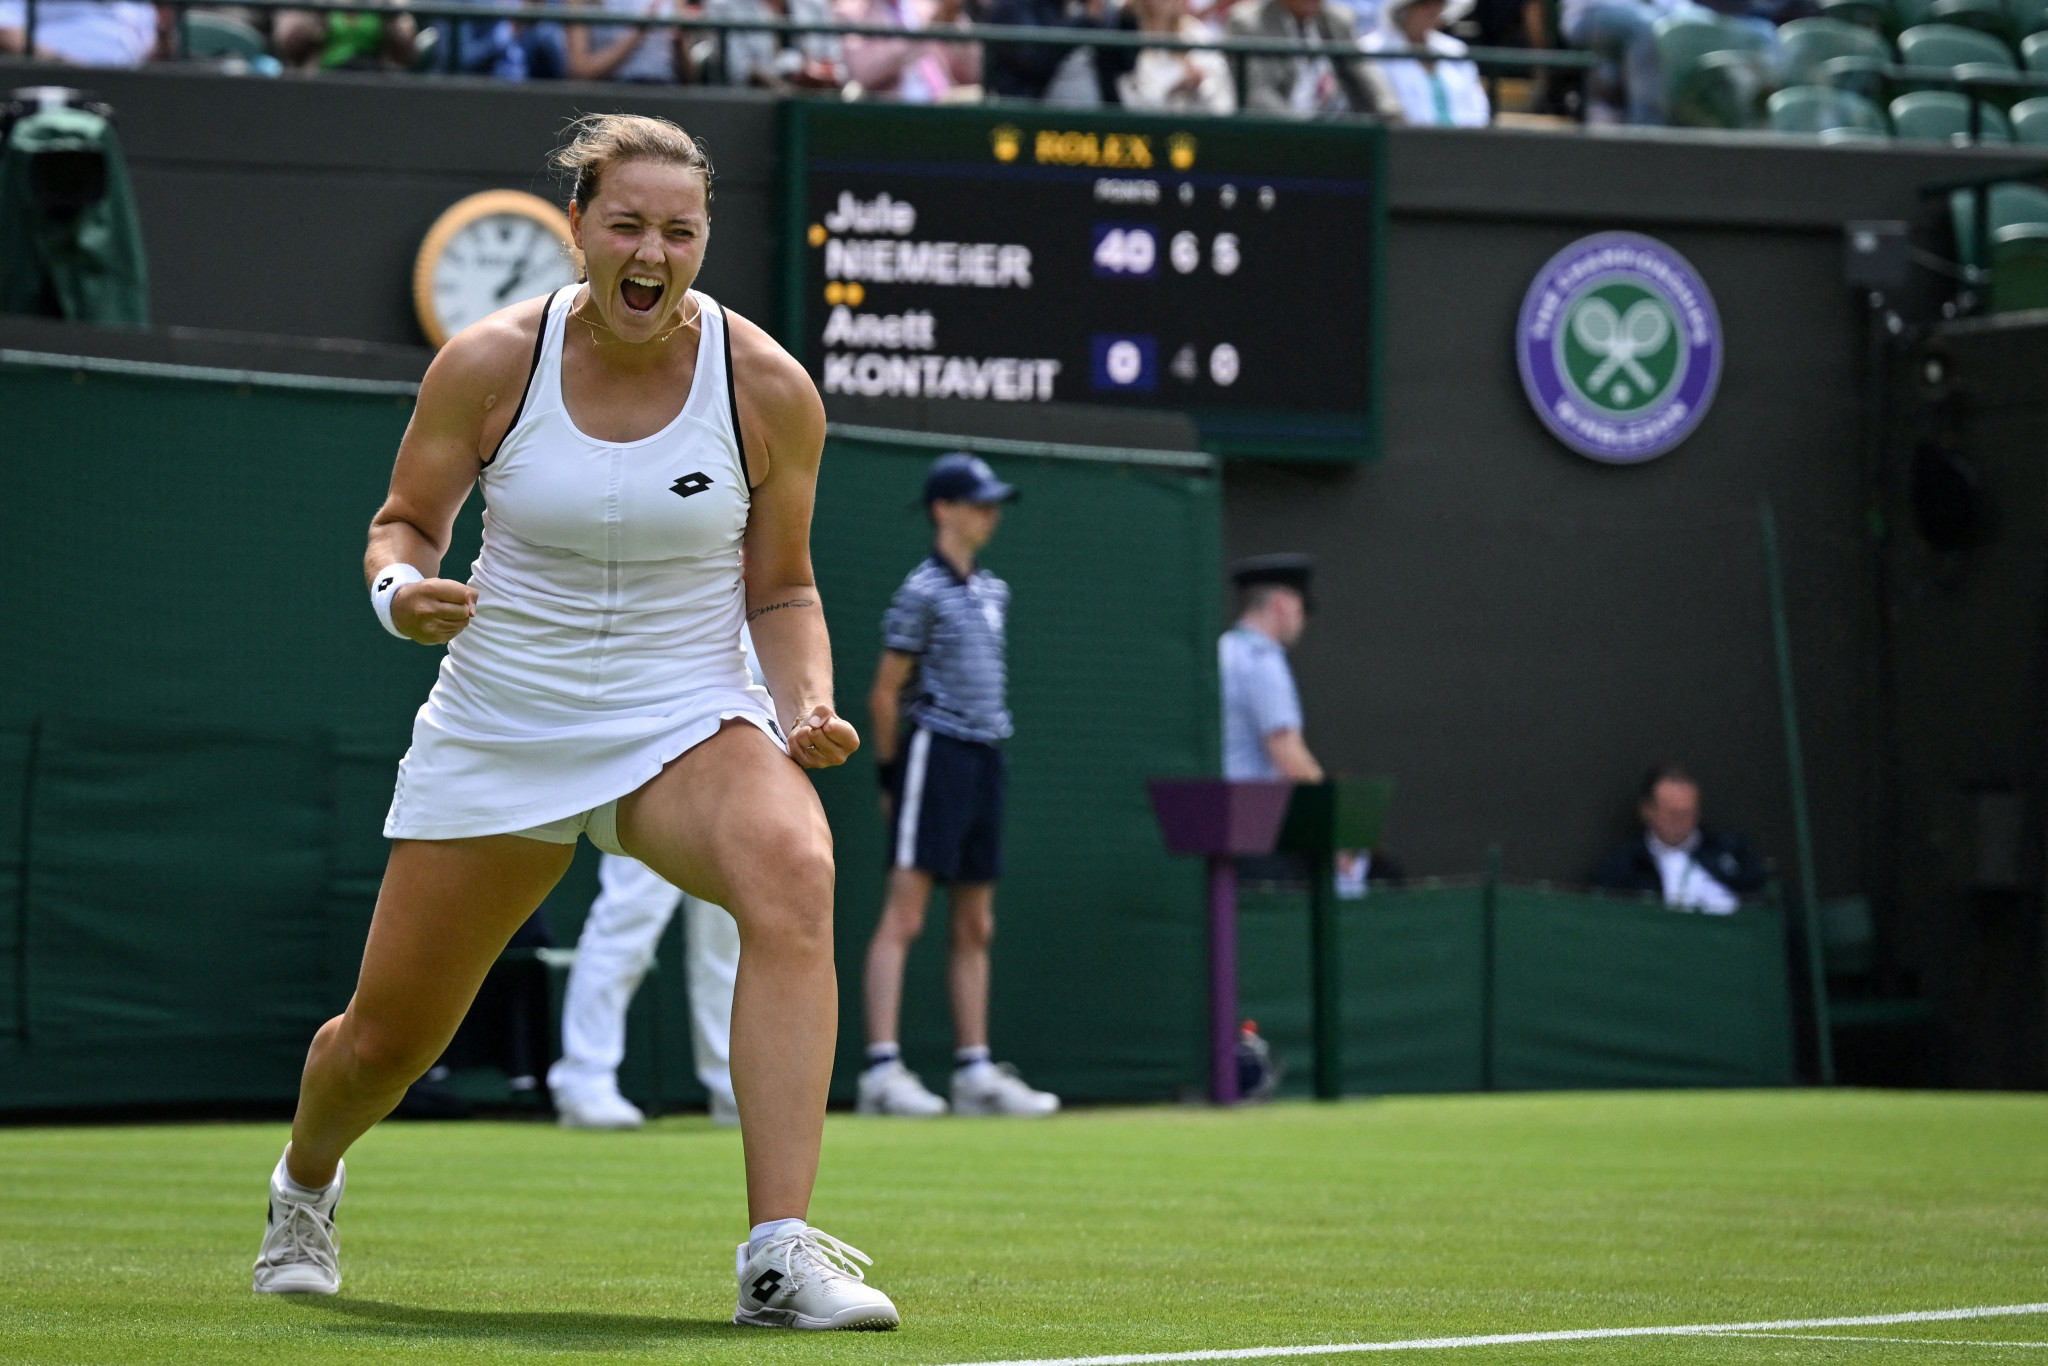 Niemeier dumps out second seed for maiden top-10 win on day of shocks at Wimbledon